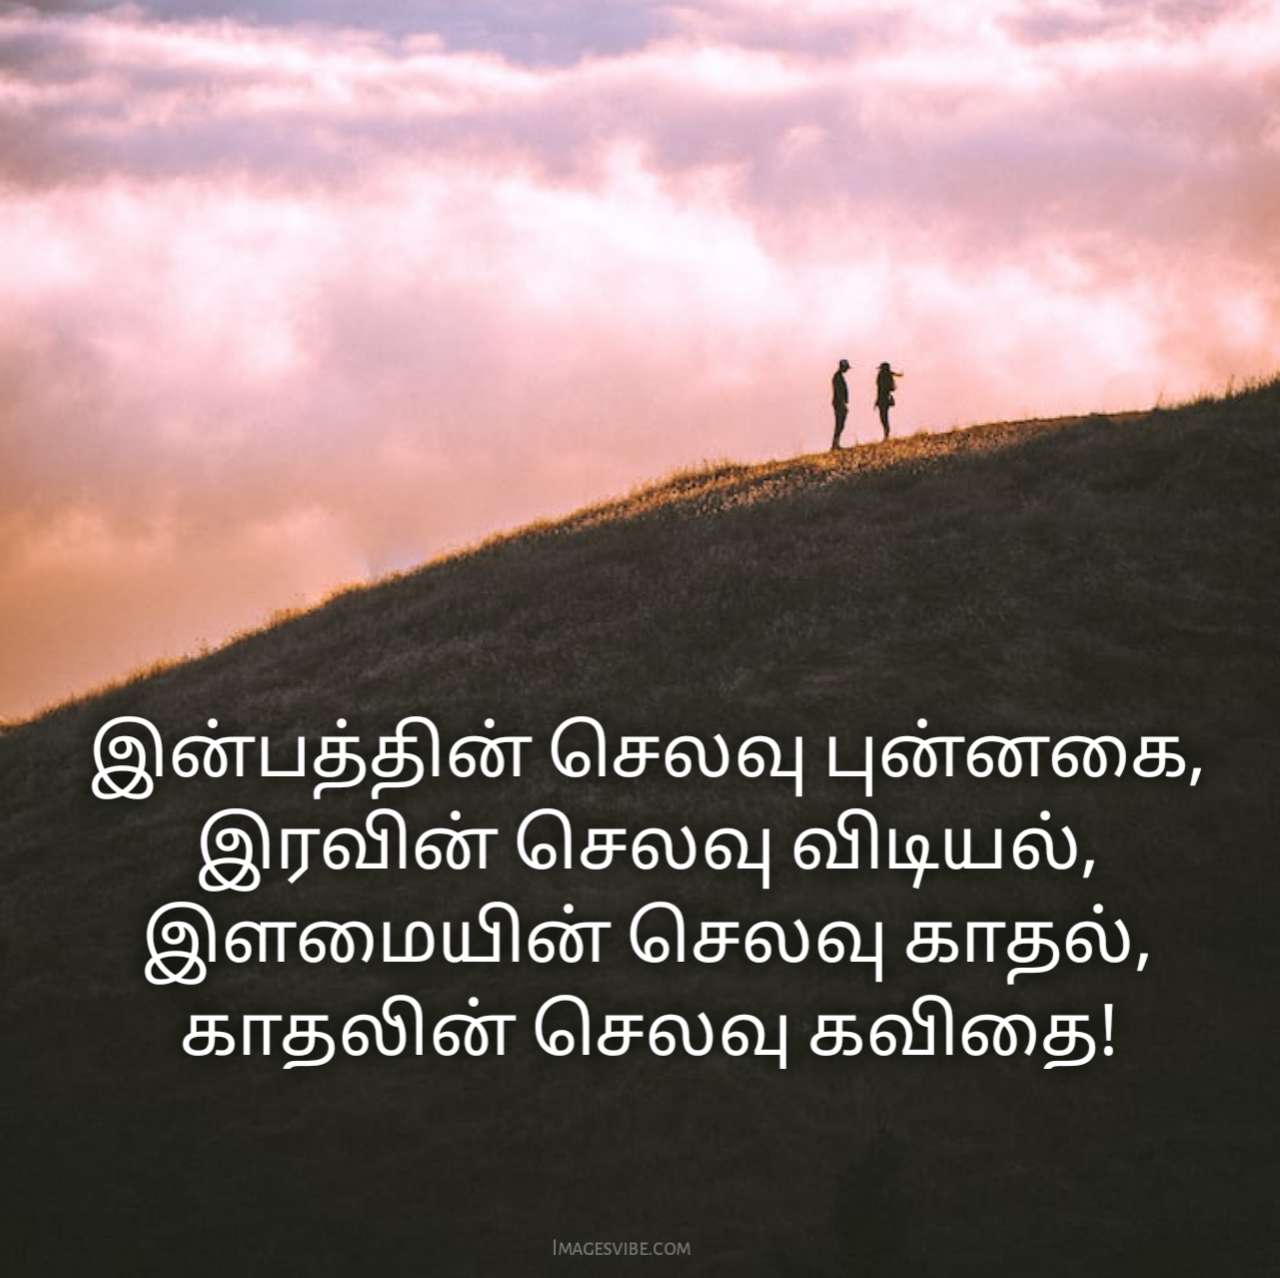 Love Quotes In Tamil2 